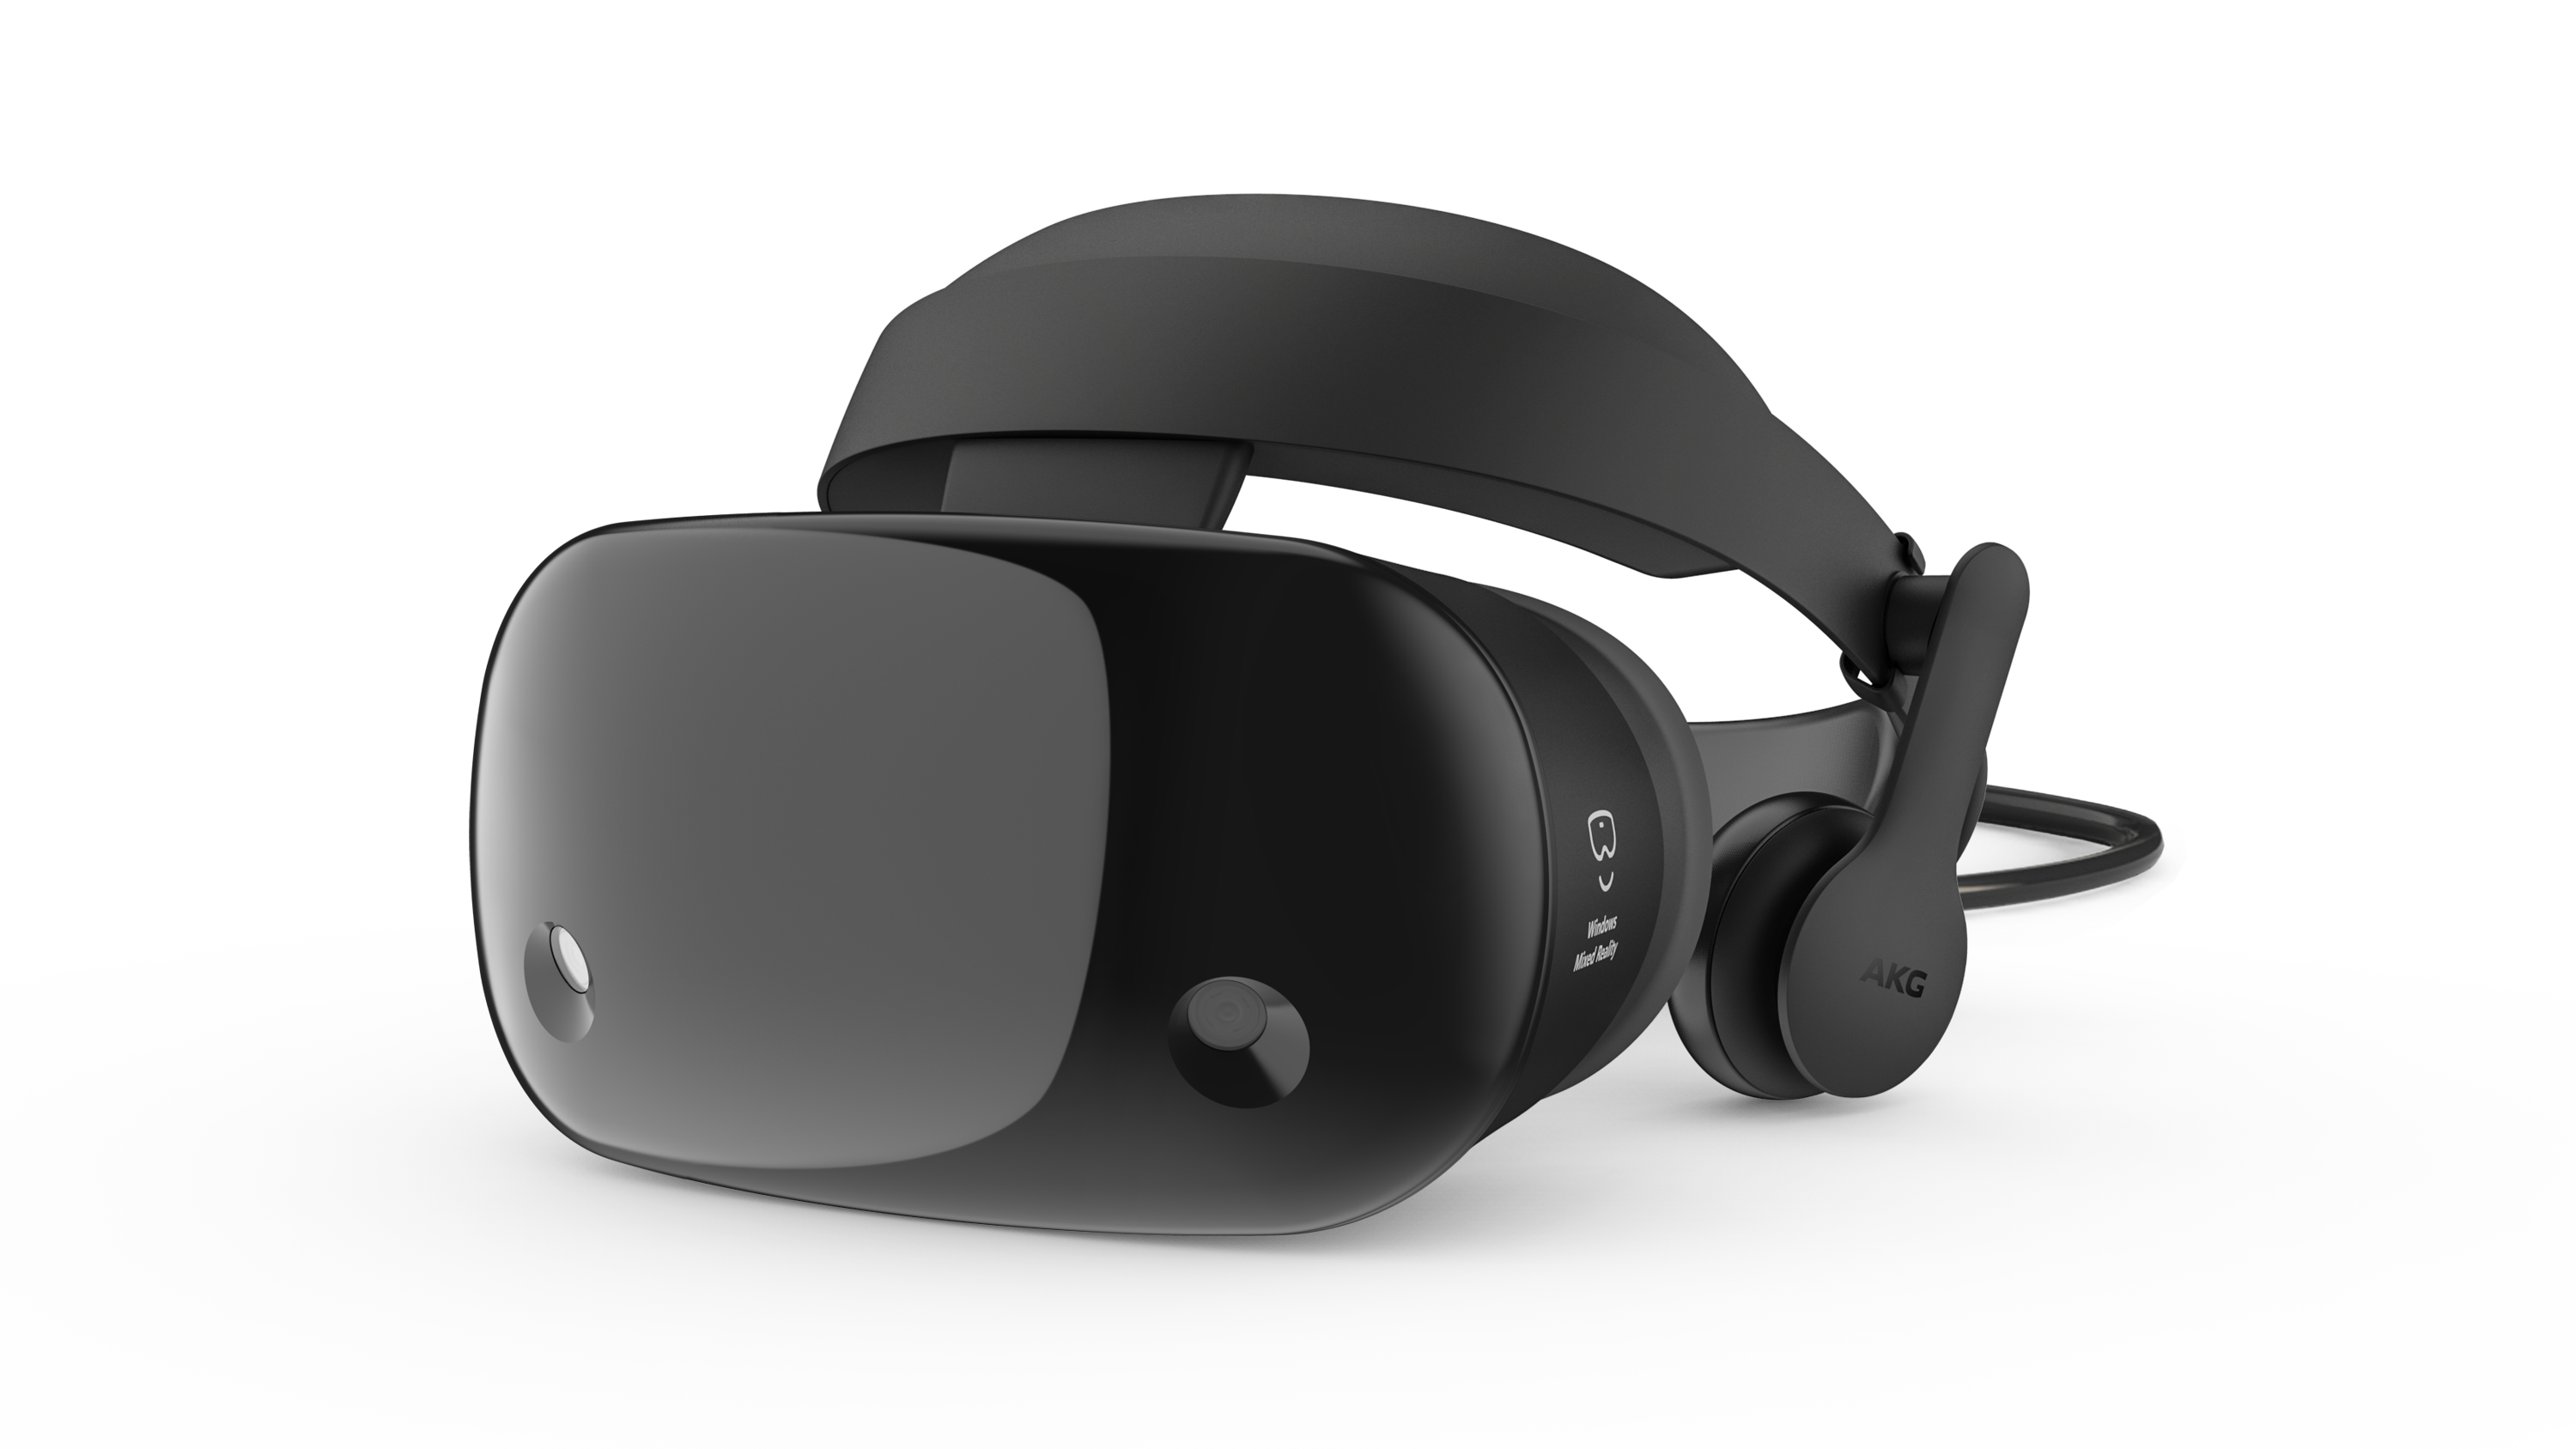 Samsung HMD Odyssey with motion controllers.